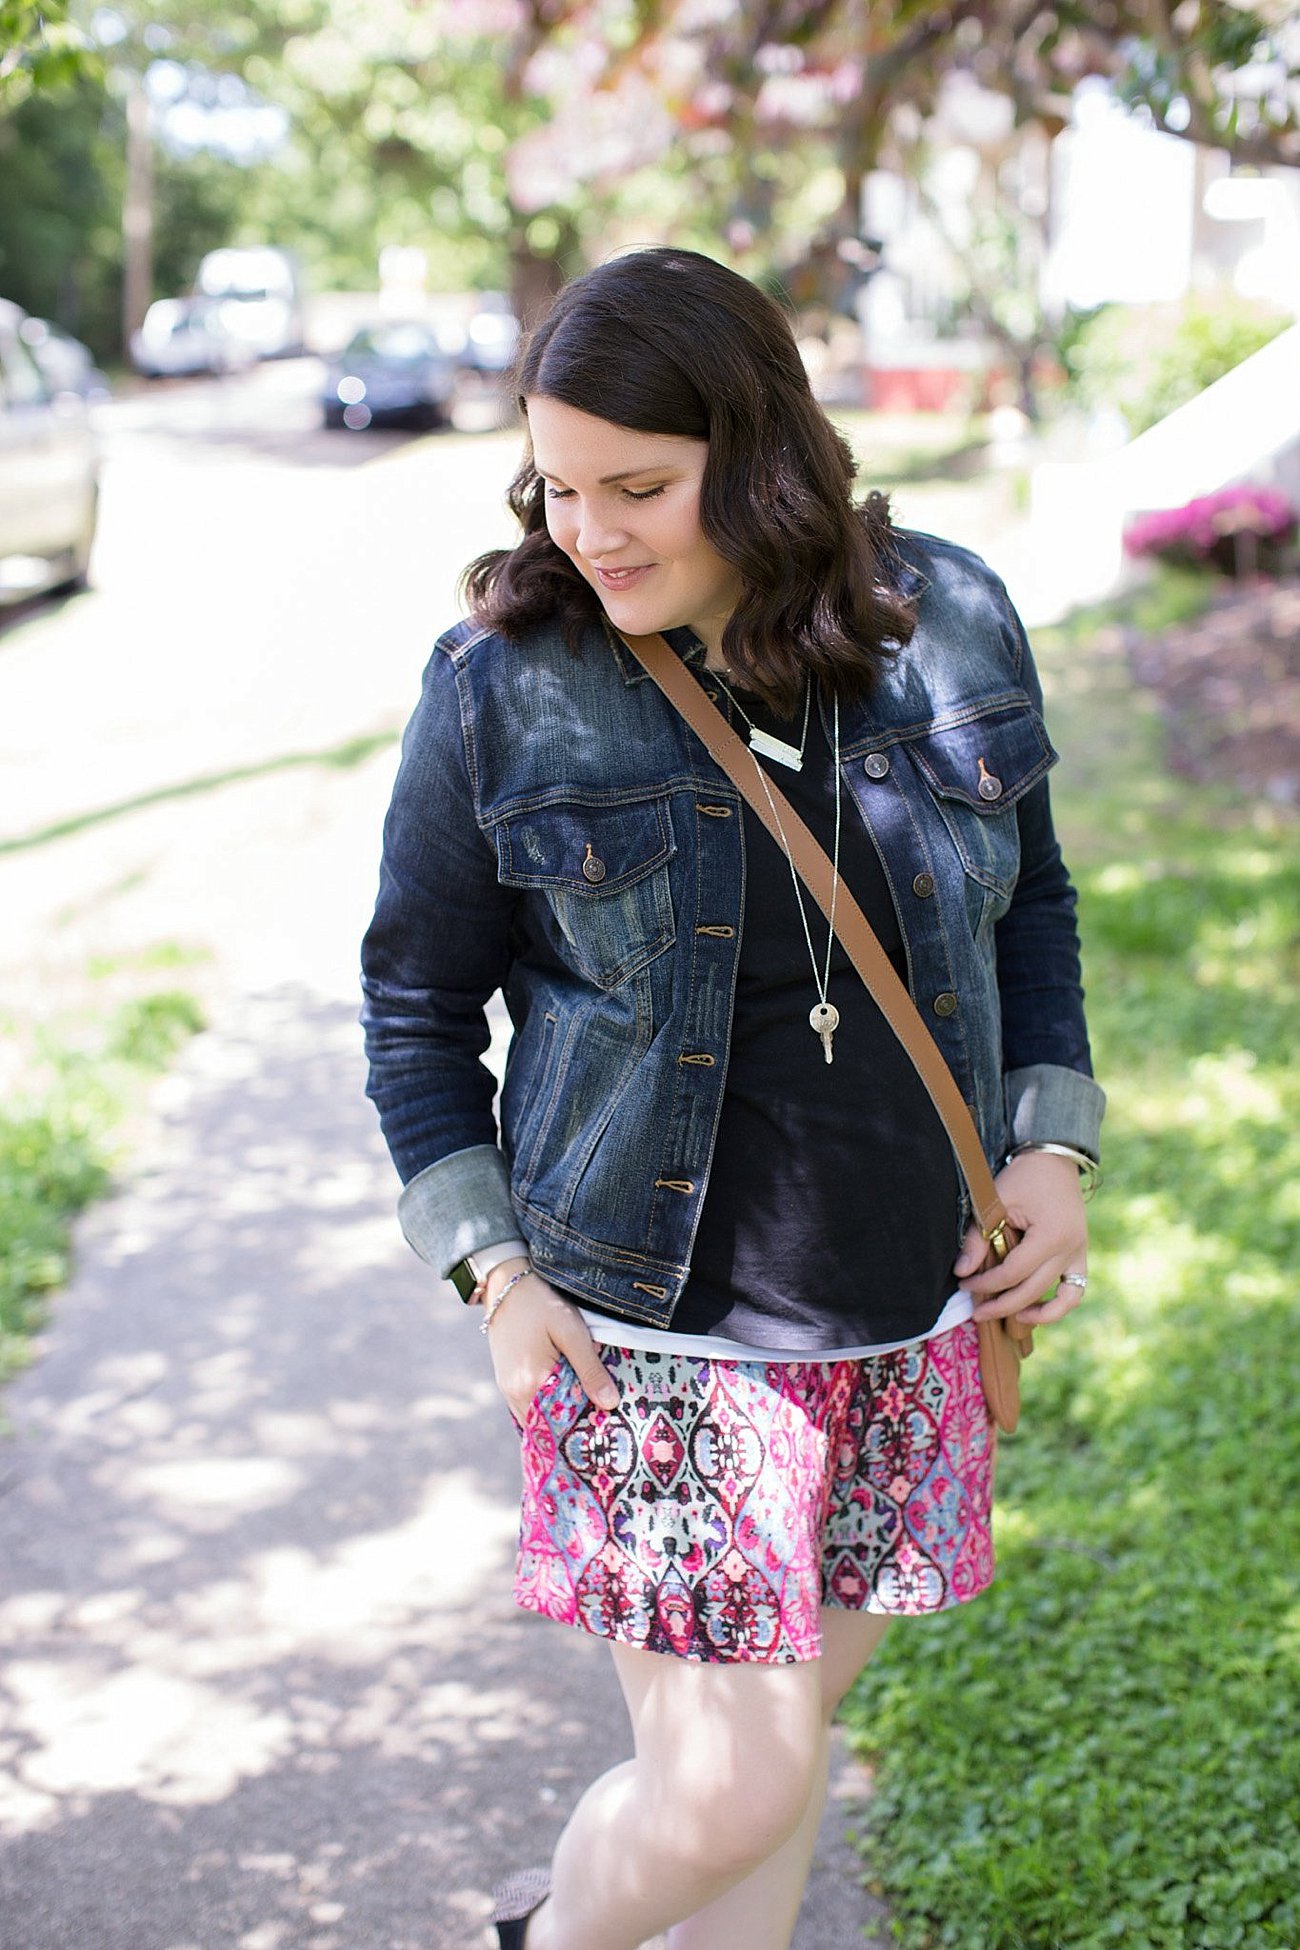 Threads 4 Thought Mona Skort, Stitch Fix Just USA Denim Jacket, Sudara Goods Globetrotter Tee, Sseko Designs Foldover Crossbody Clutch, The Root Collective shoes | Ethical Fashion & Style Blogger (7)